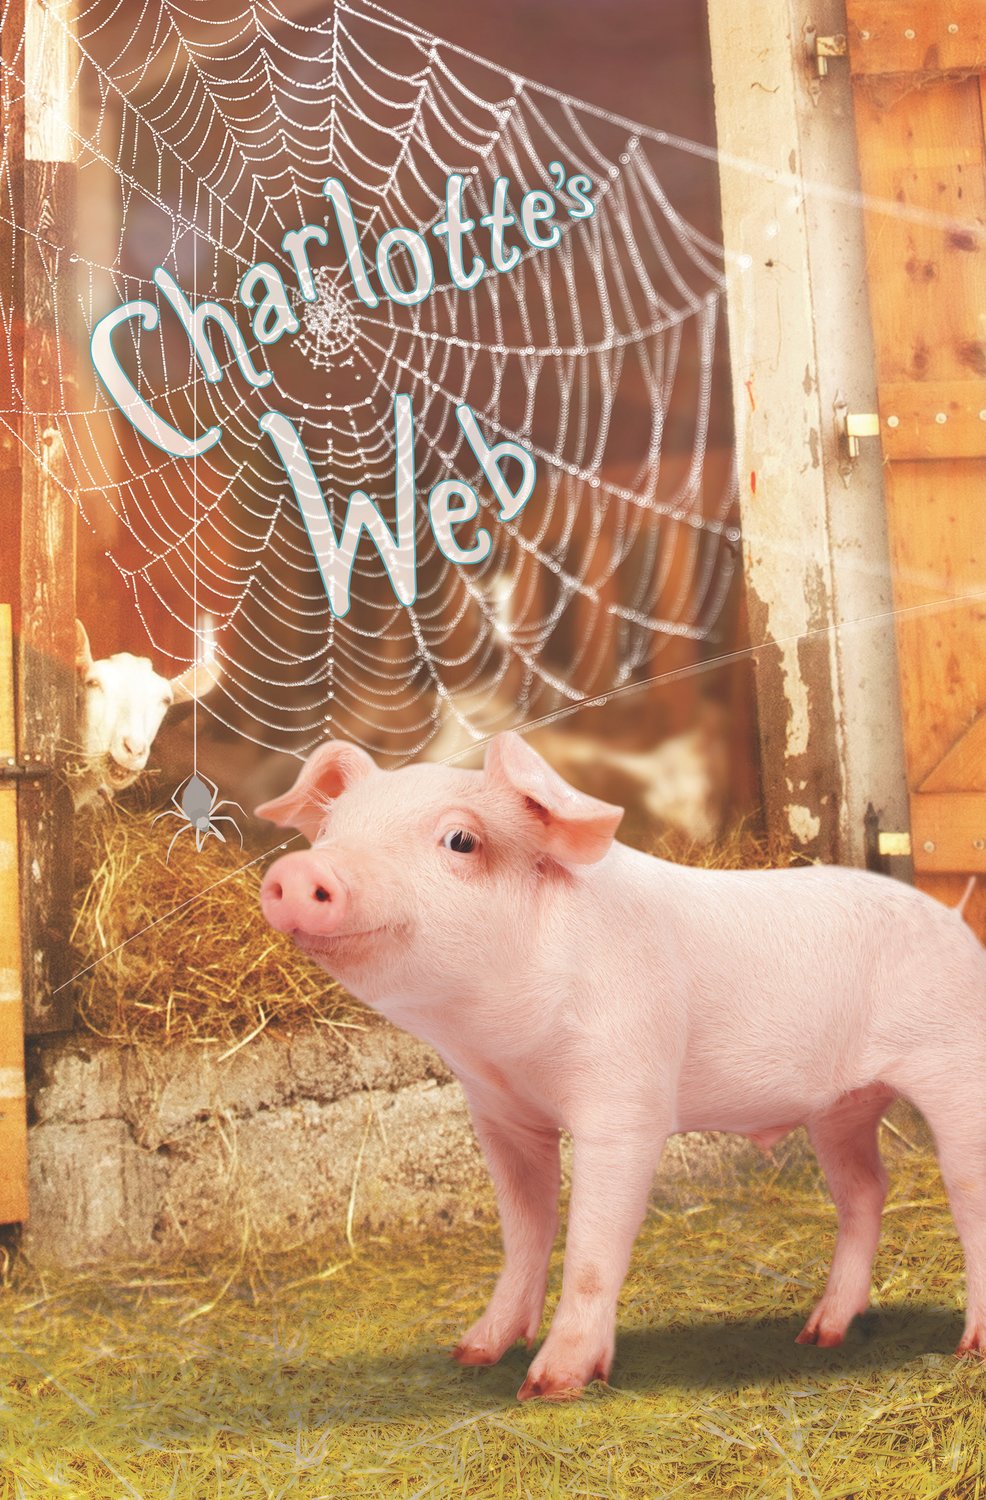 “Charlotte’s Web” will be performed outdoors at the PA Shakespeare Festival in Center Valley.